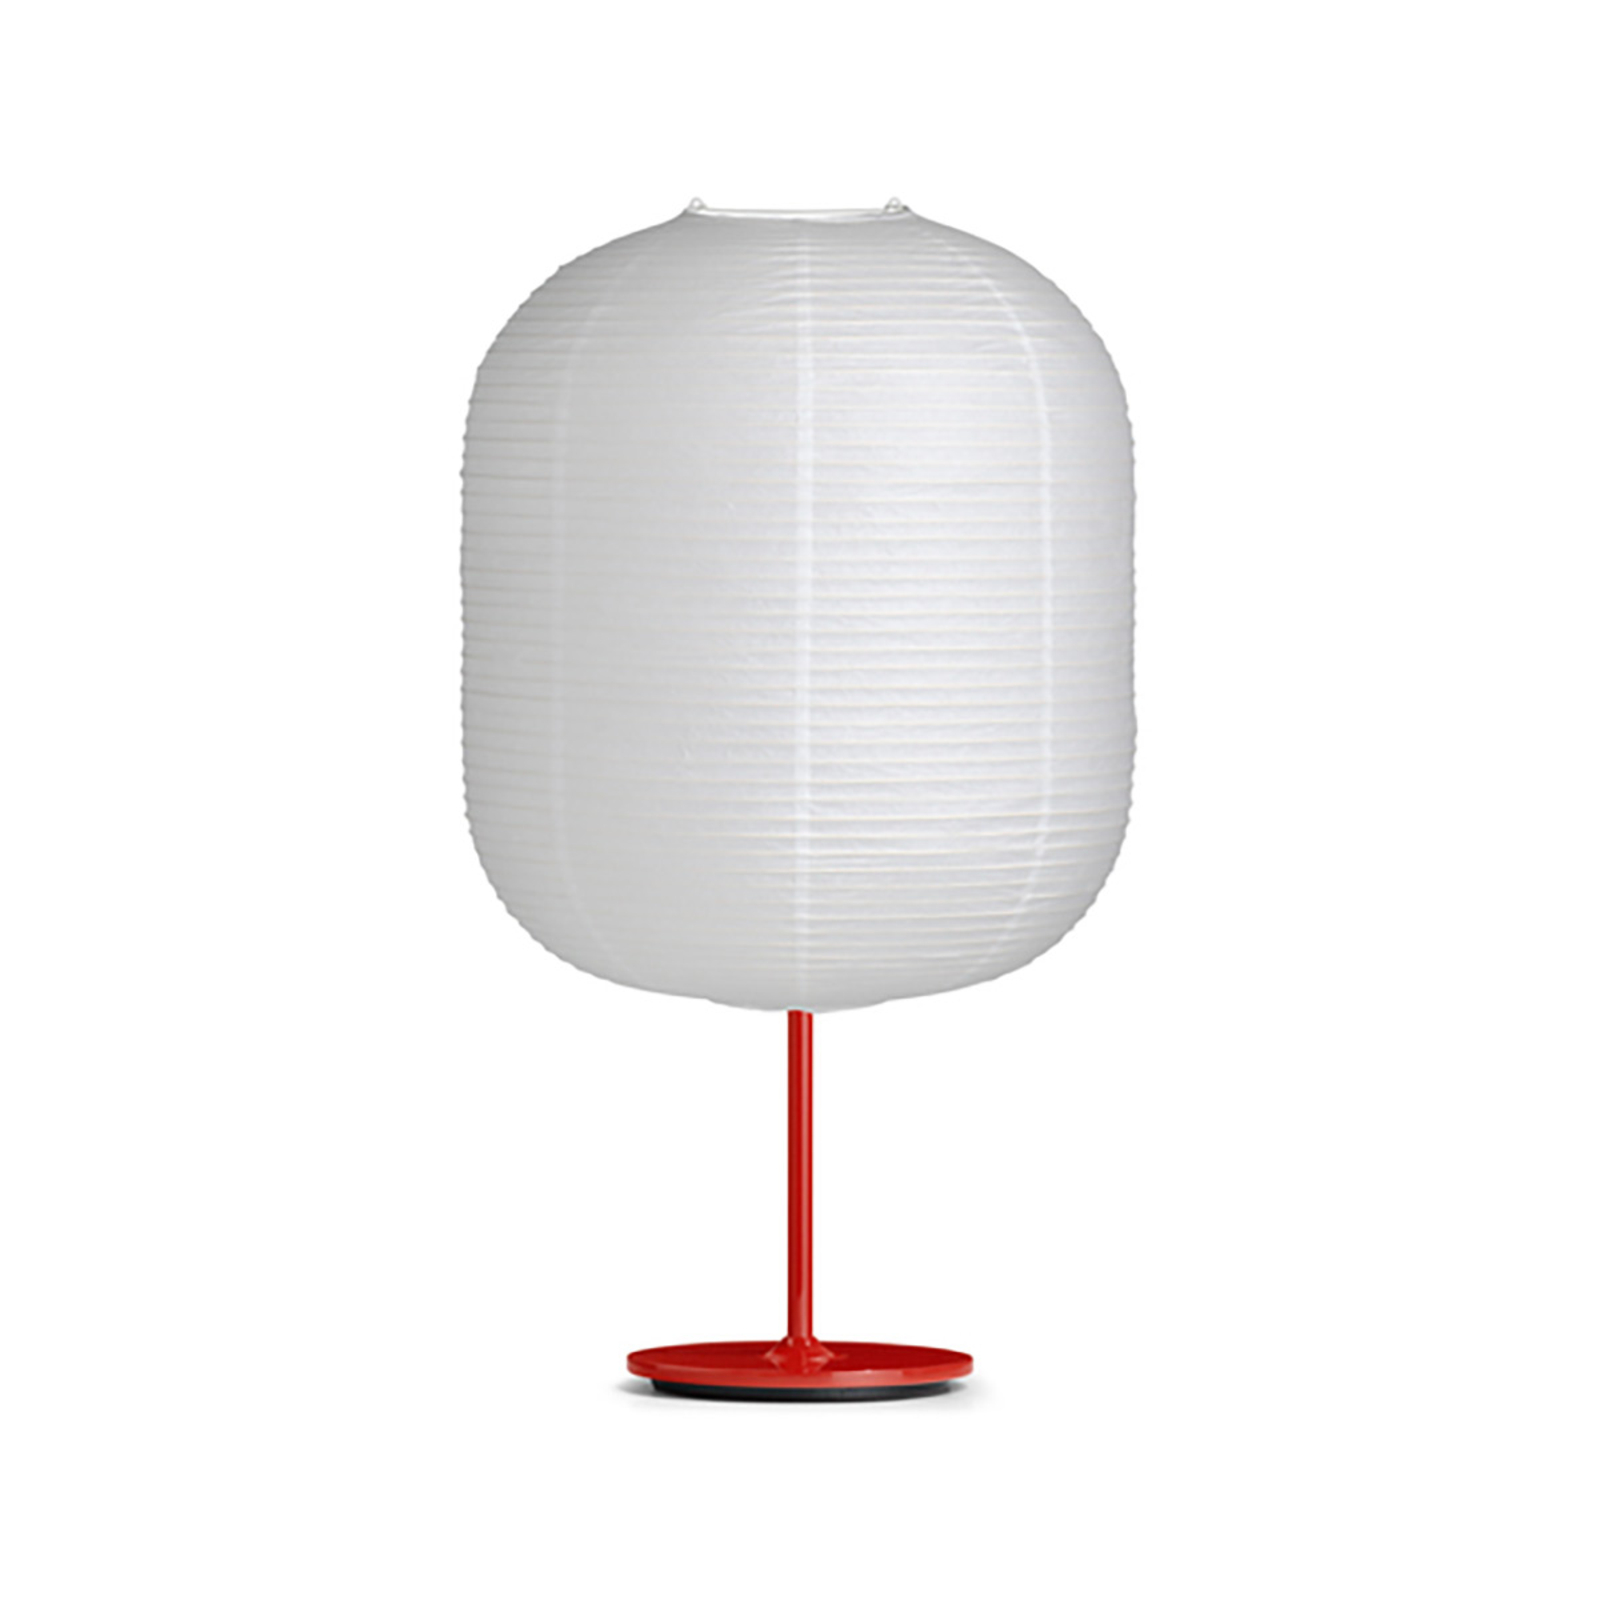 HAY Common Table, Oblong lampshade signal red base